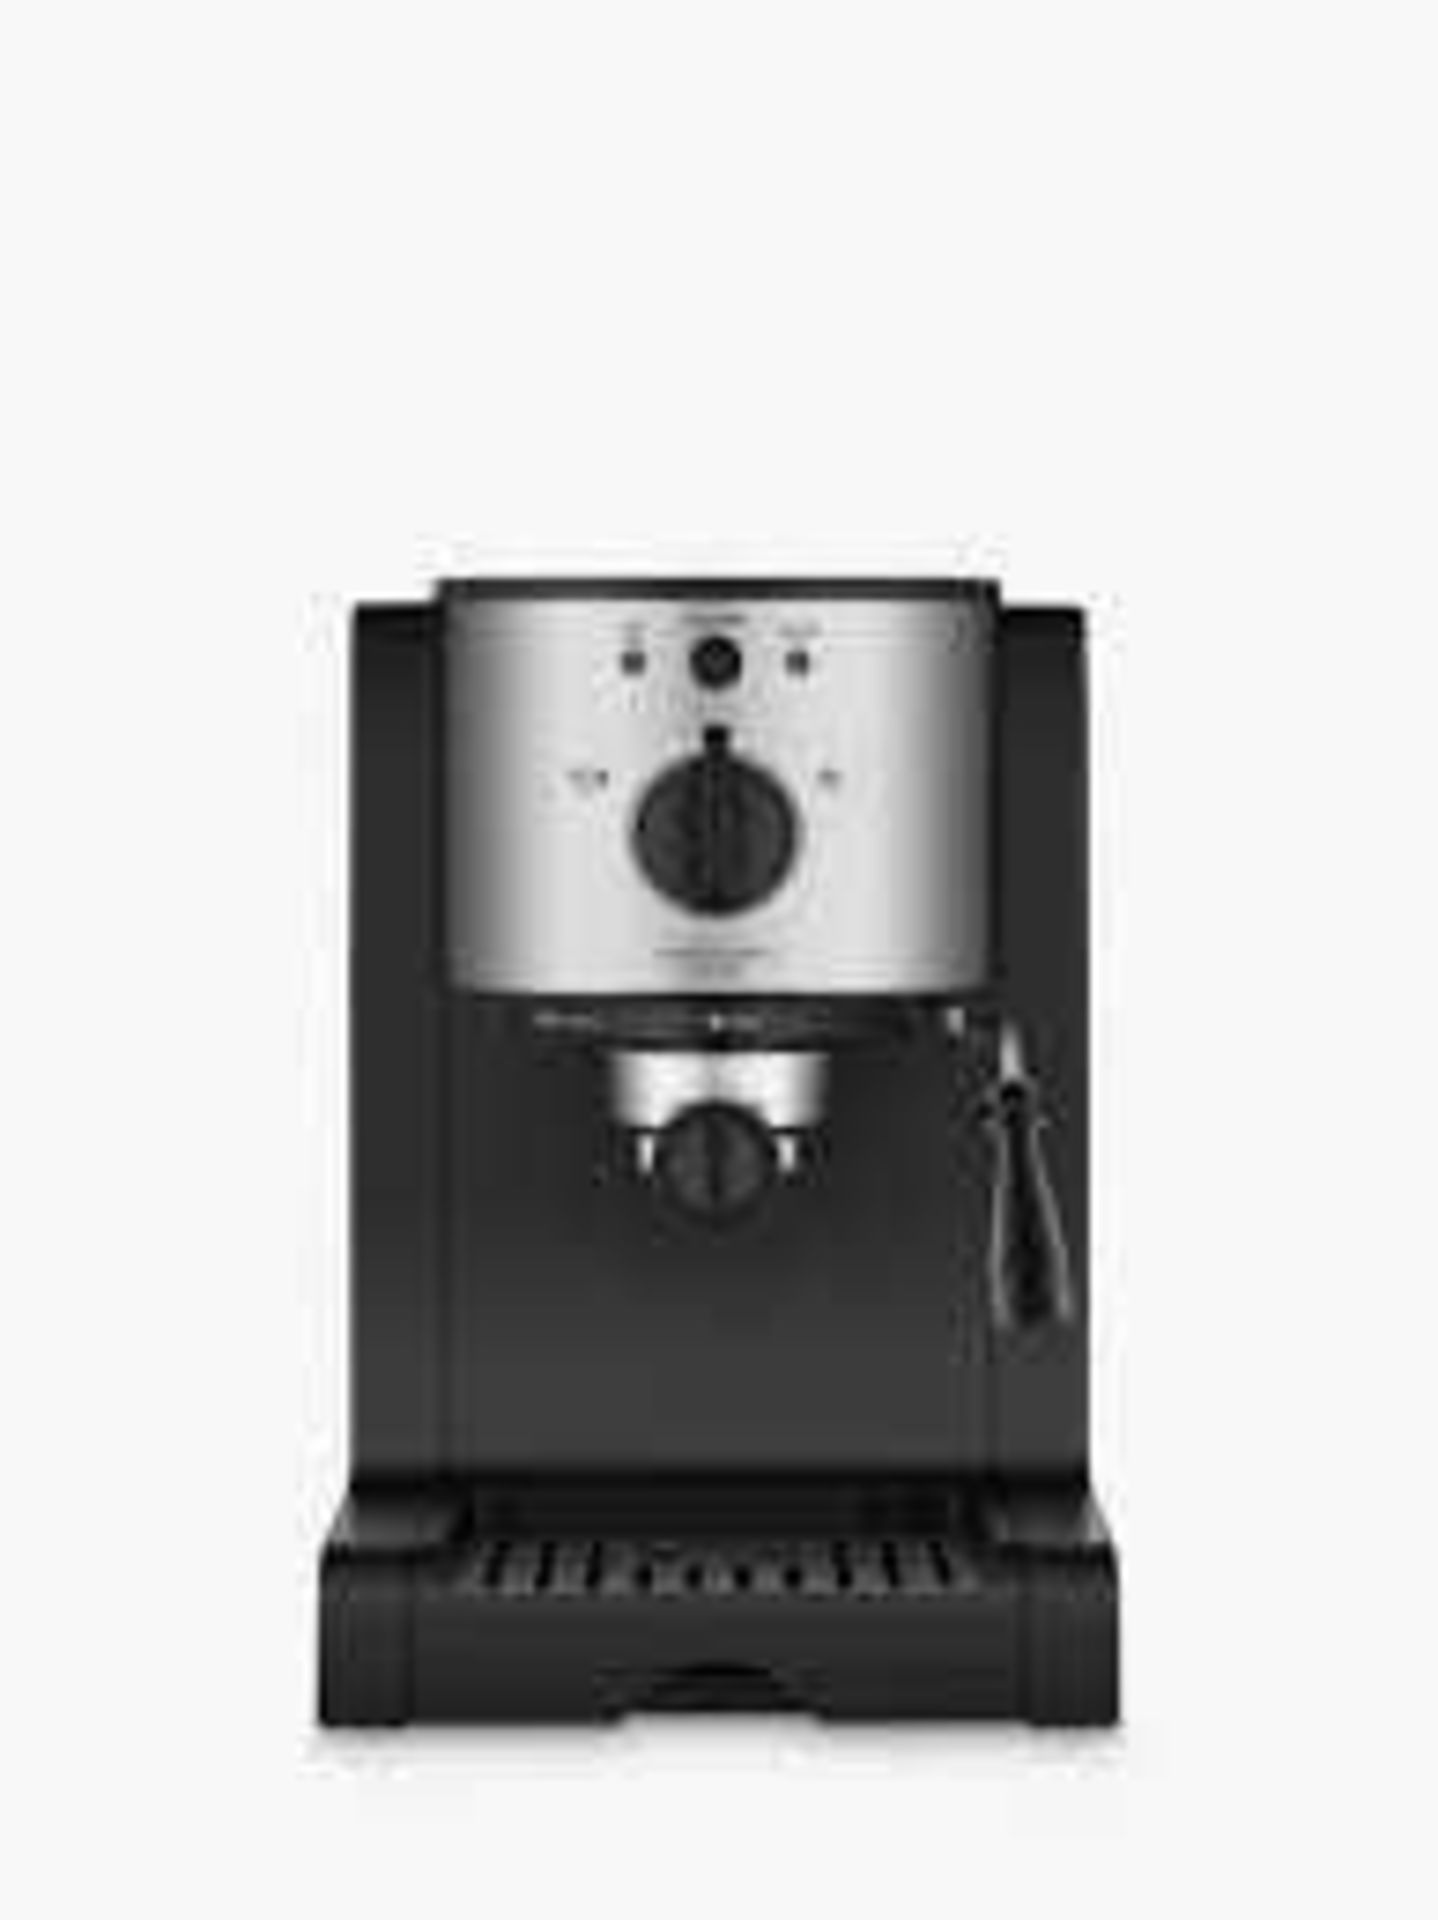 Combined RRP £130 Lot To Contain John Lewis Pump Espresso Coffee Machine With Integrated Milk System - Image 2 of 2